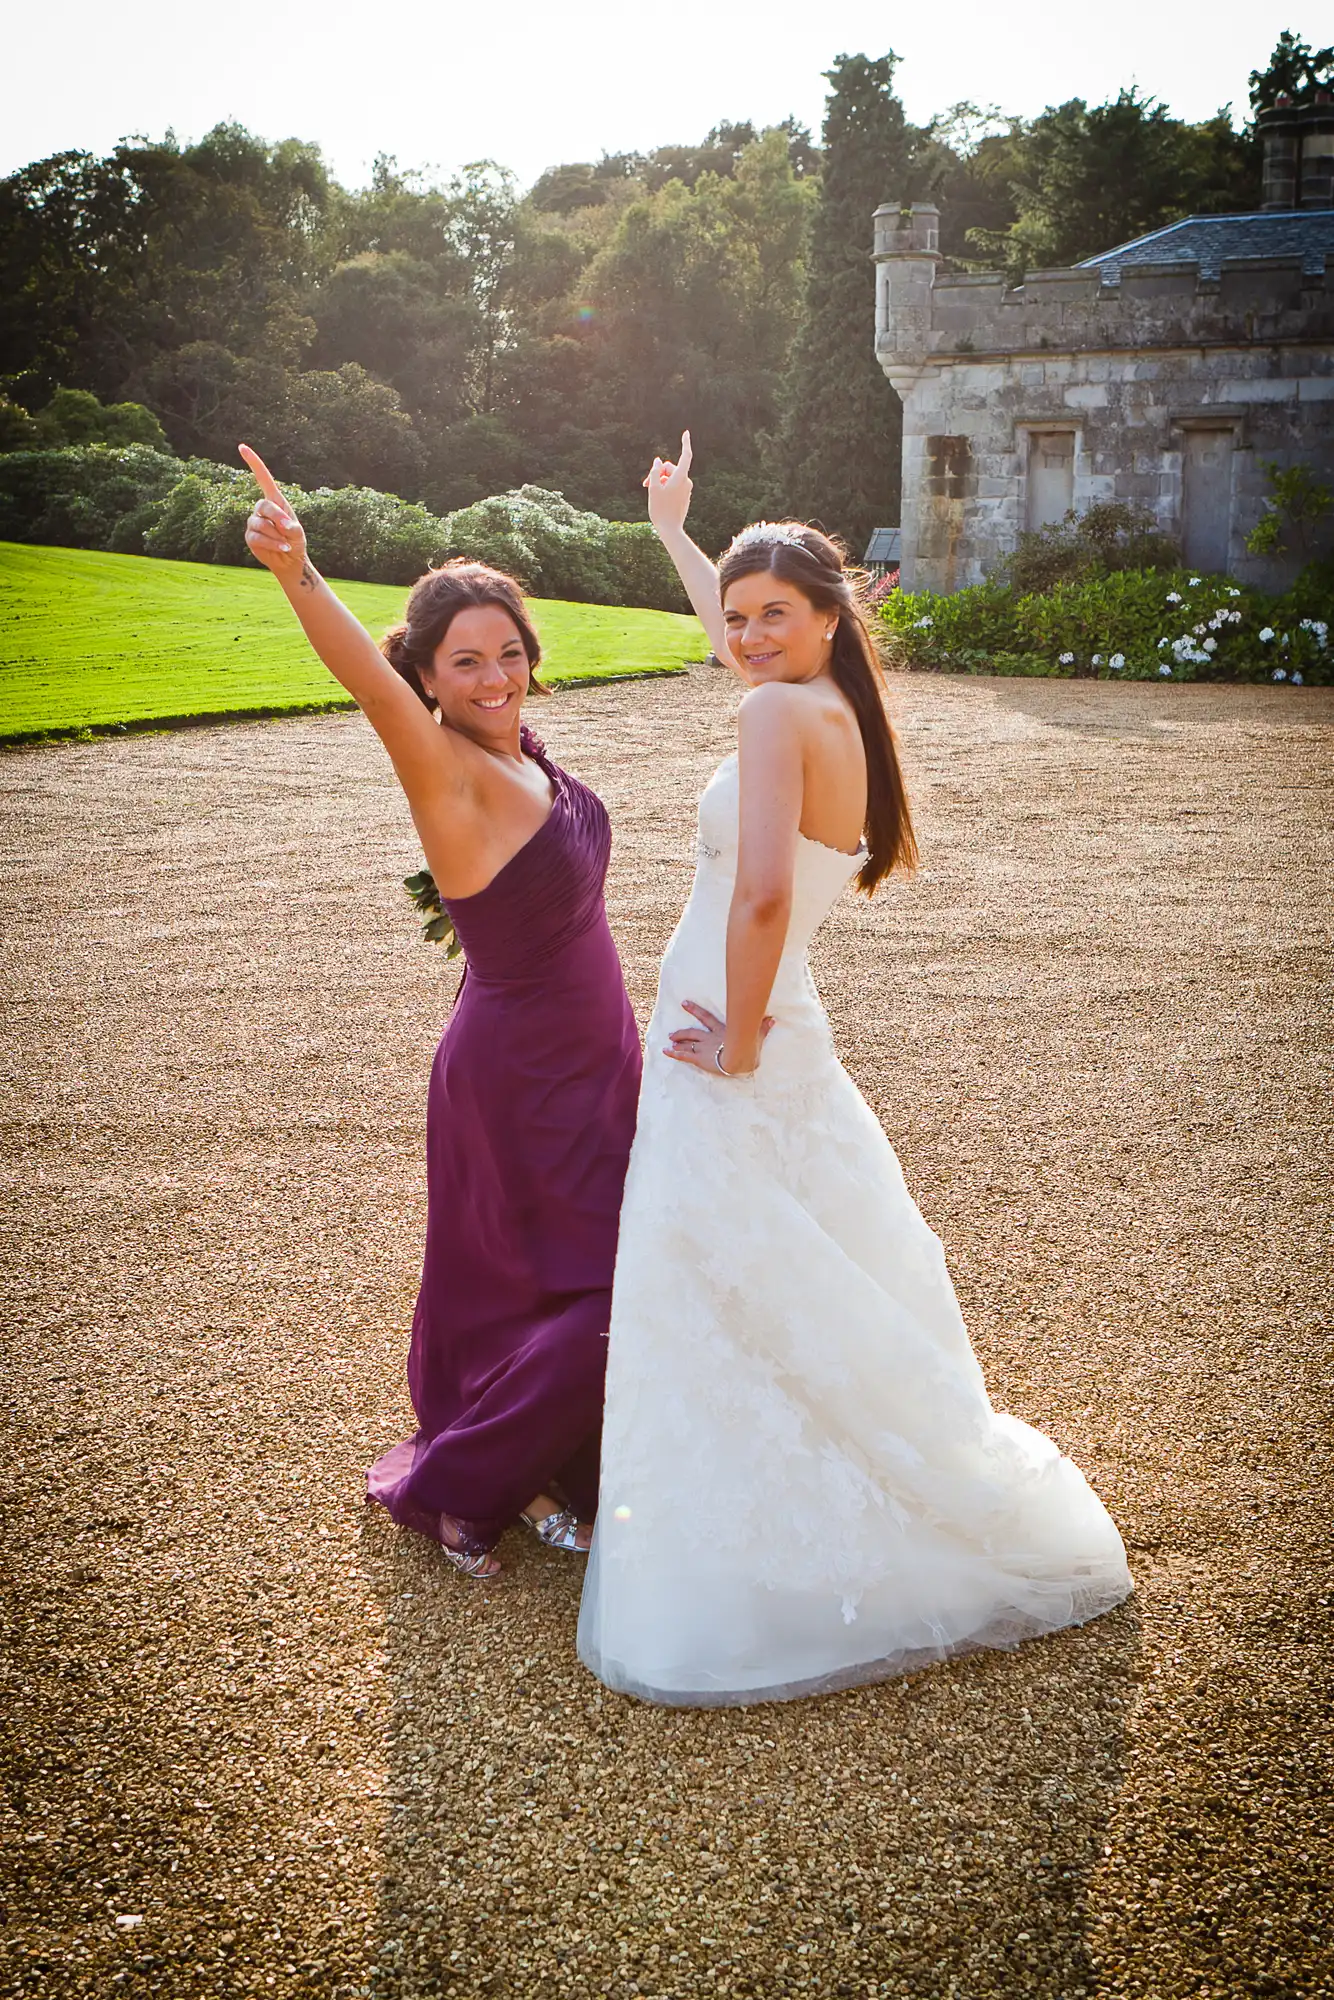 A bride in a white gown and a bridesmaid in a purple dress joyously pose with their hands up in front of a stately home and green lawn.